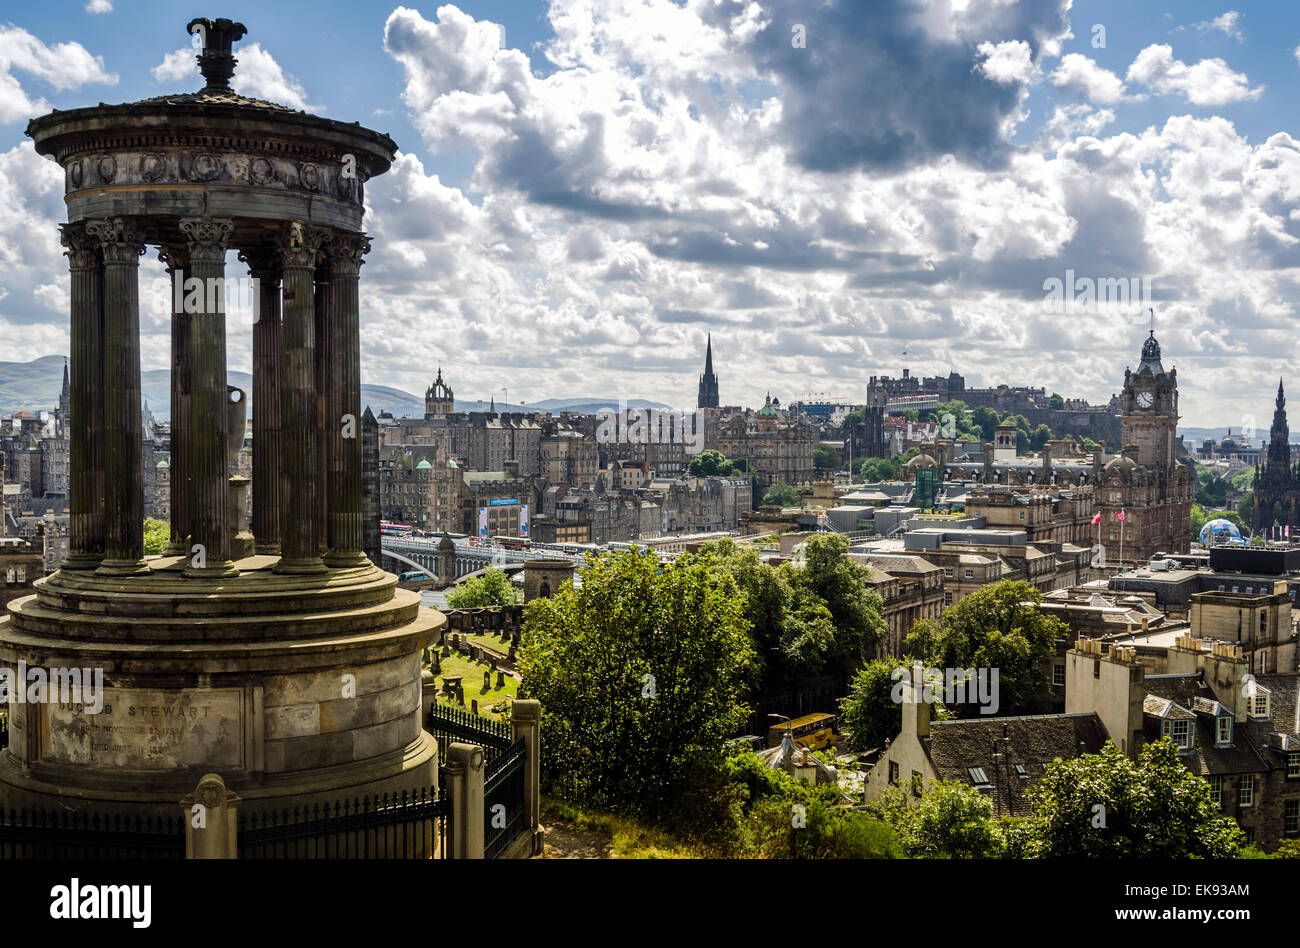 Views across Edinburgh from Calton Hill, showing the Dugald Stewart Monument n the foreground and the Castle in the distance. Stock Photo